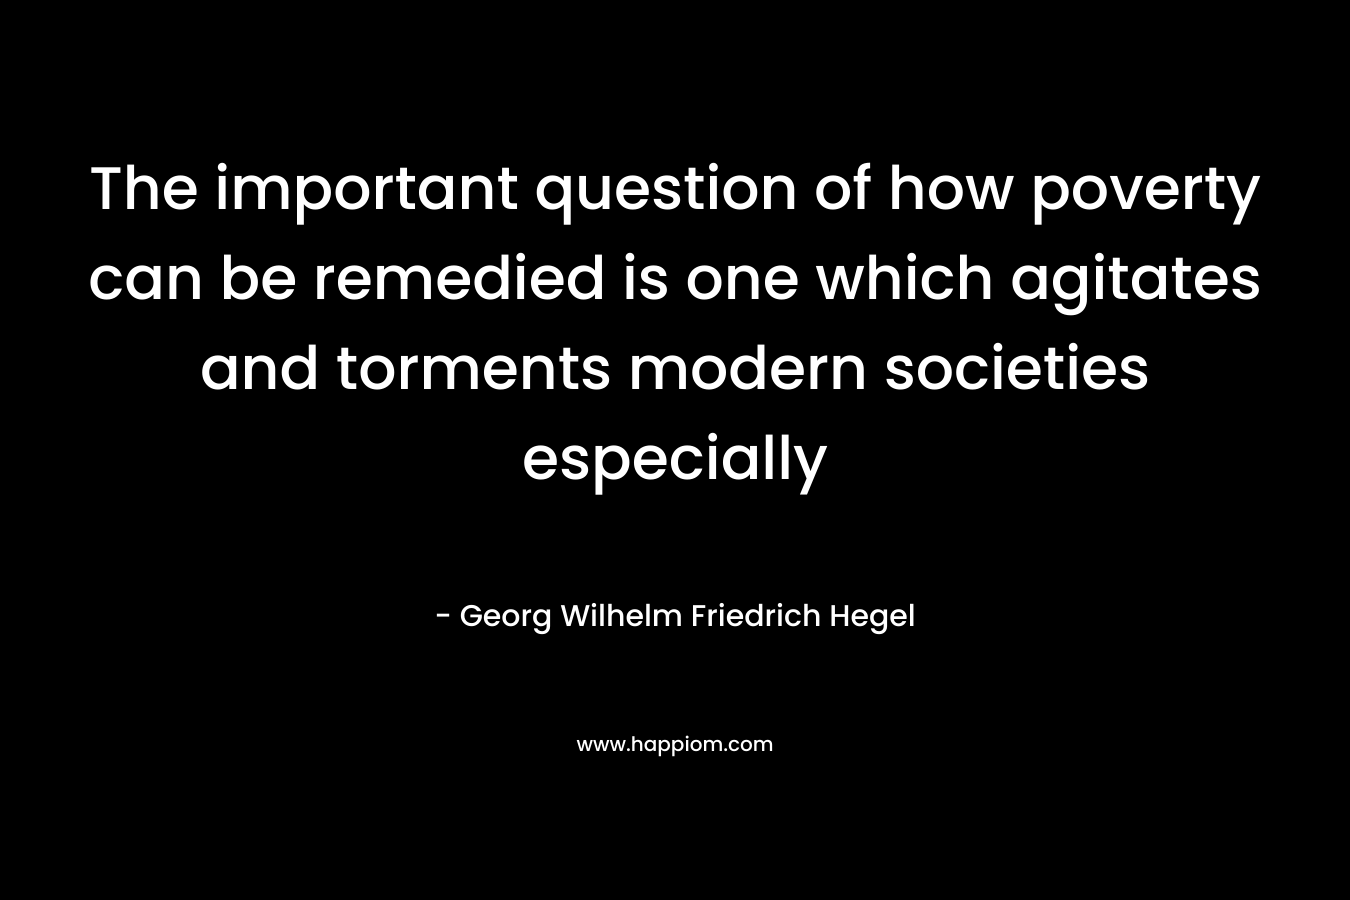 The important question of how poverty can be remedied is one which agitates and torments modern societies especially – Georg Wilhelm Friedrich Hegel